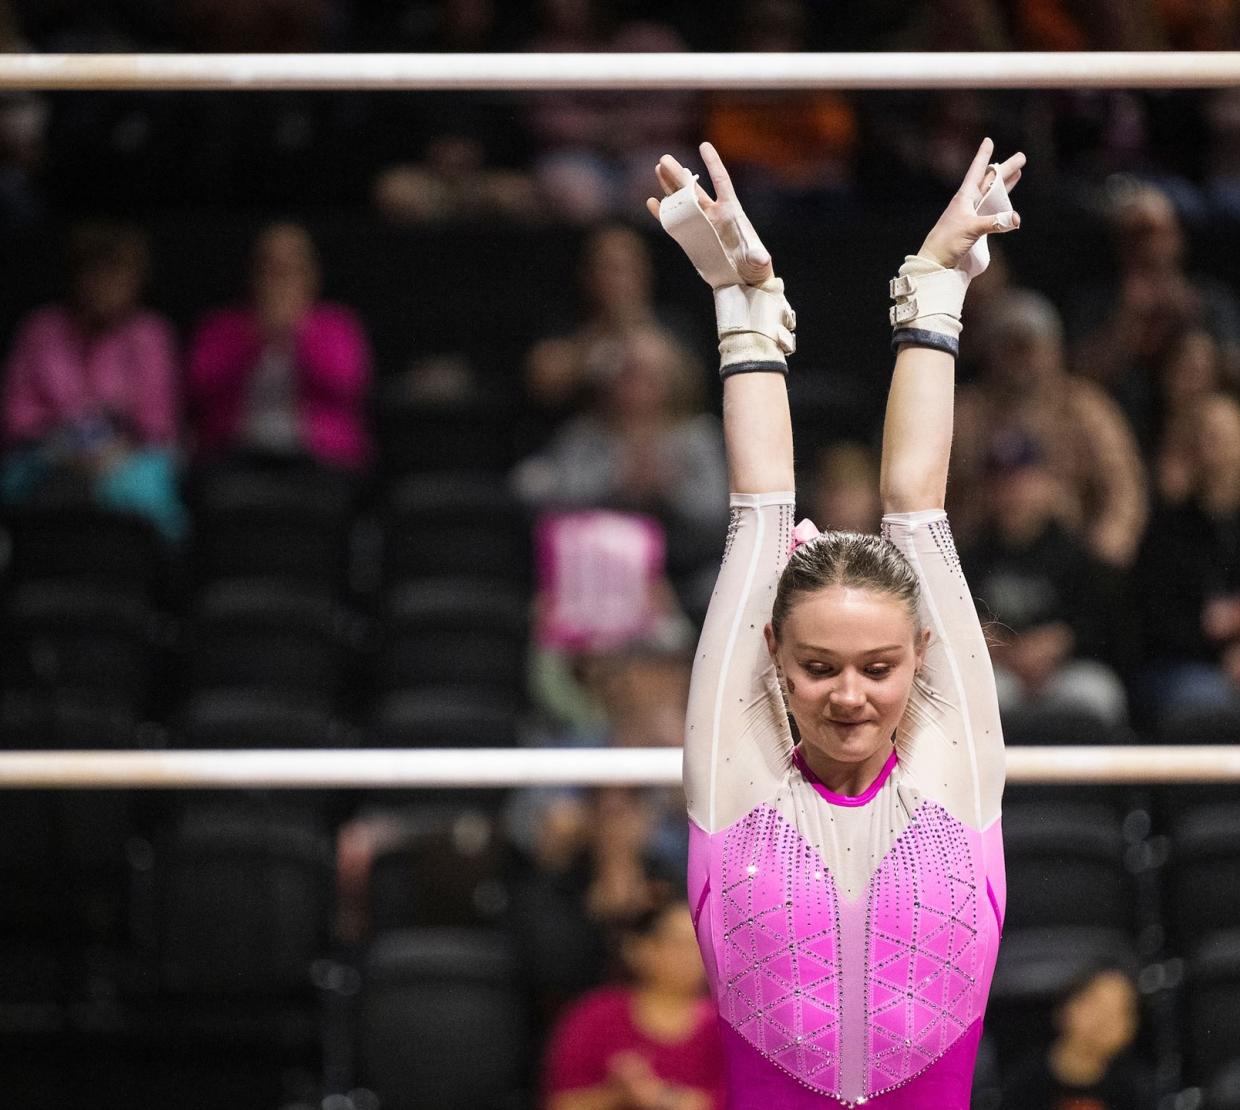 Carley Beeman stands in an OSU leotard after finishing a bar routine.